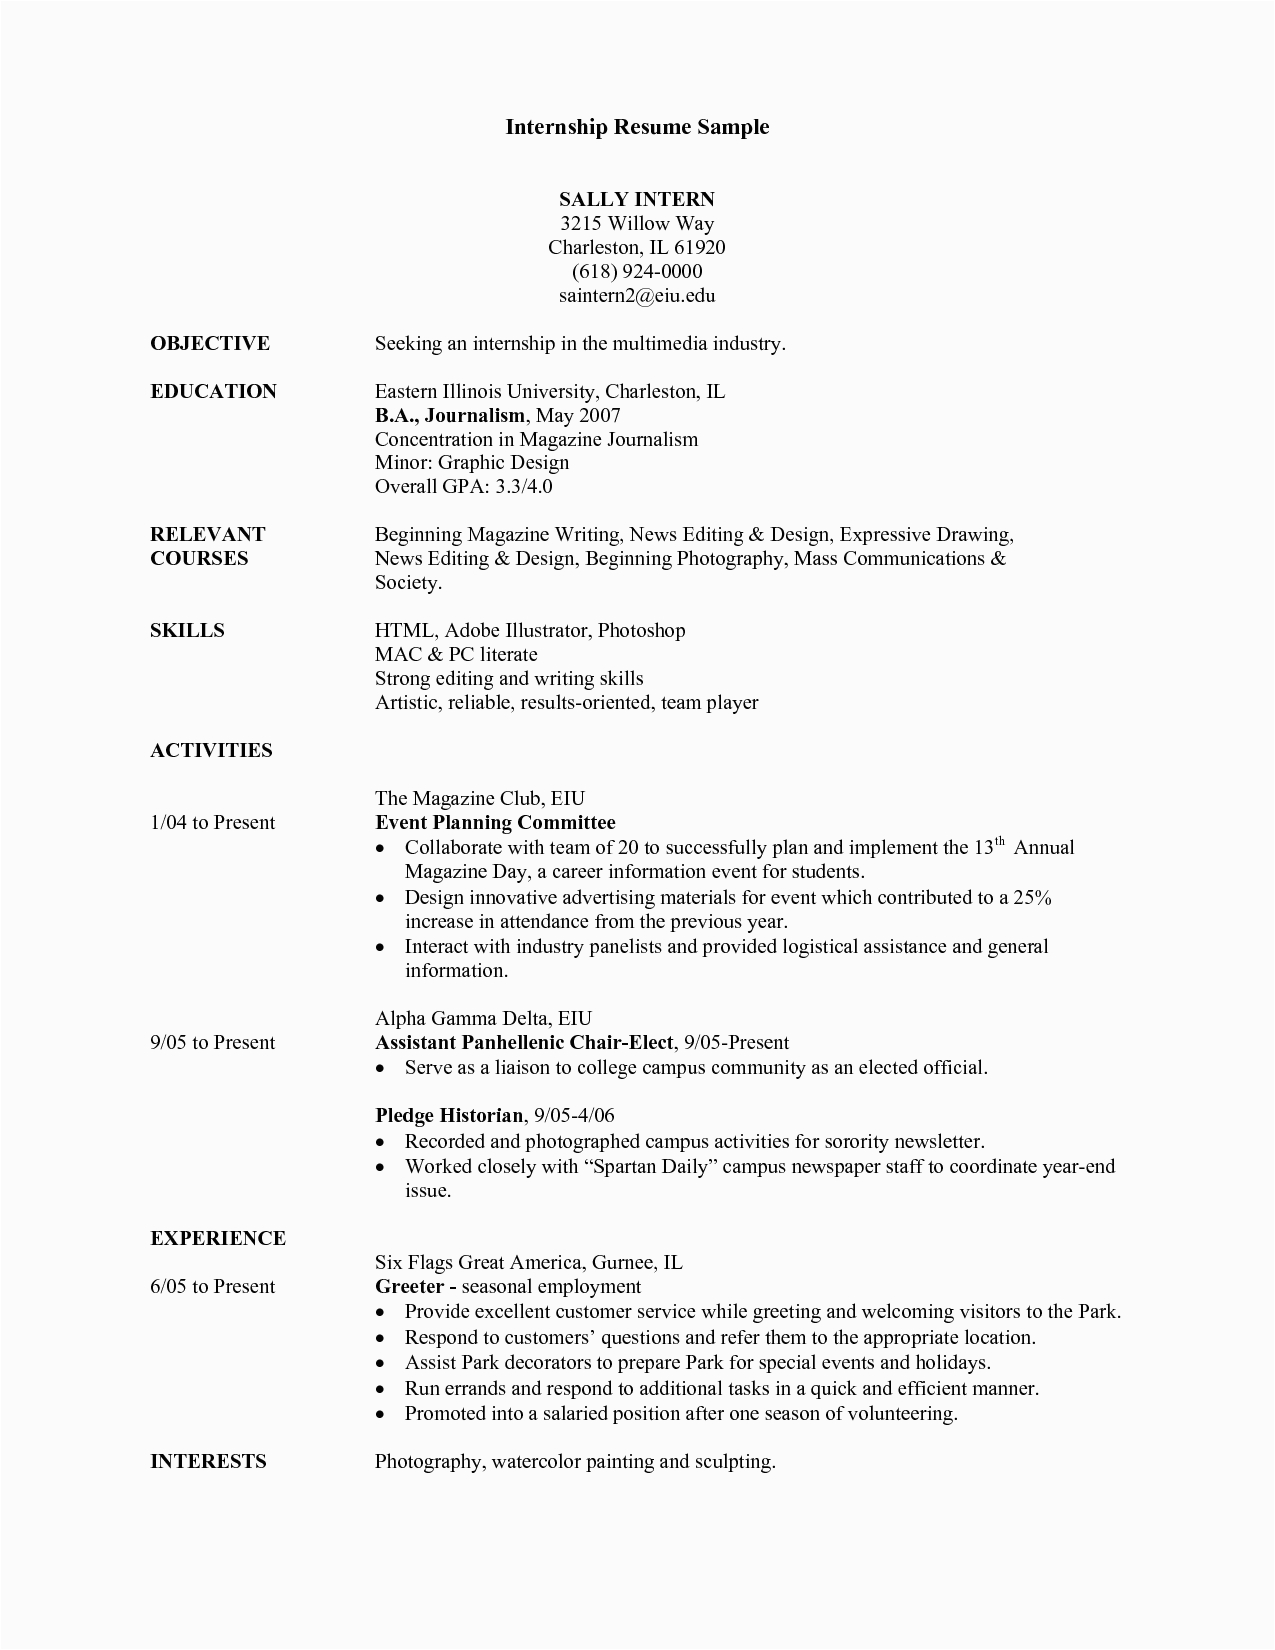 Resume Template for College Student Applying for Internship Student Resume for Internship Database Letter Templates